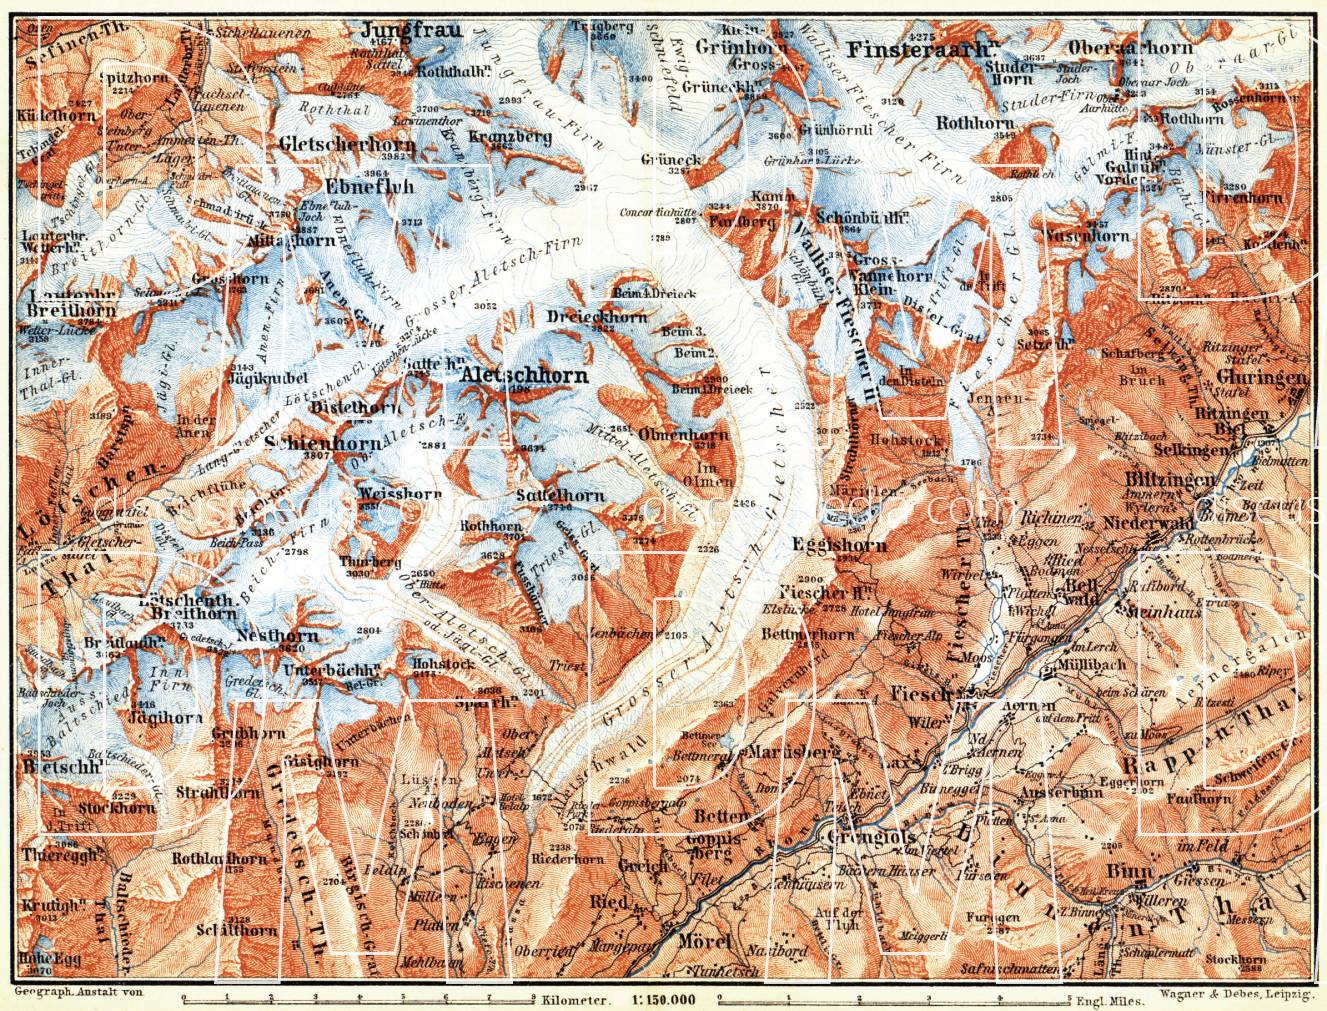 Old map of the vicinity of the Aletsch Glacier in 1898. Buy vintage map